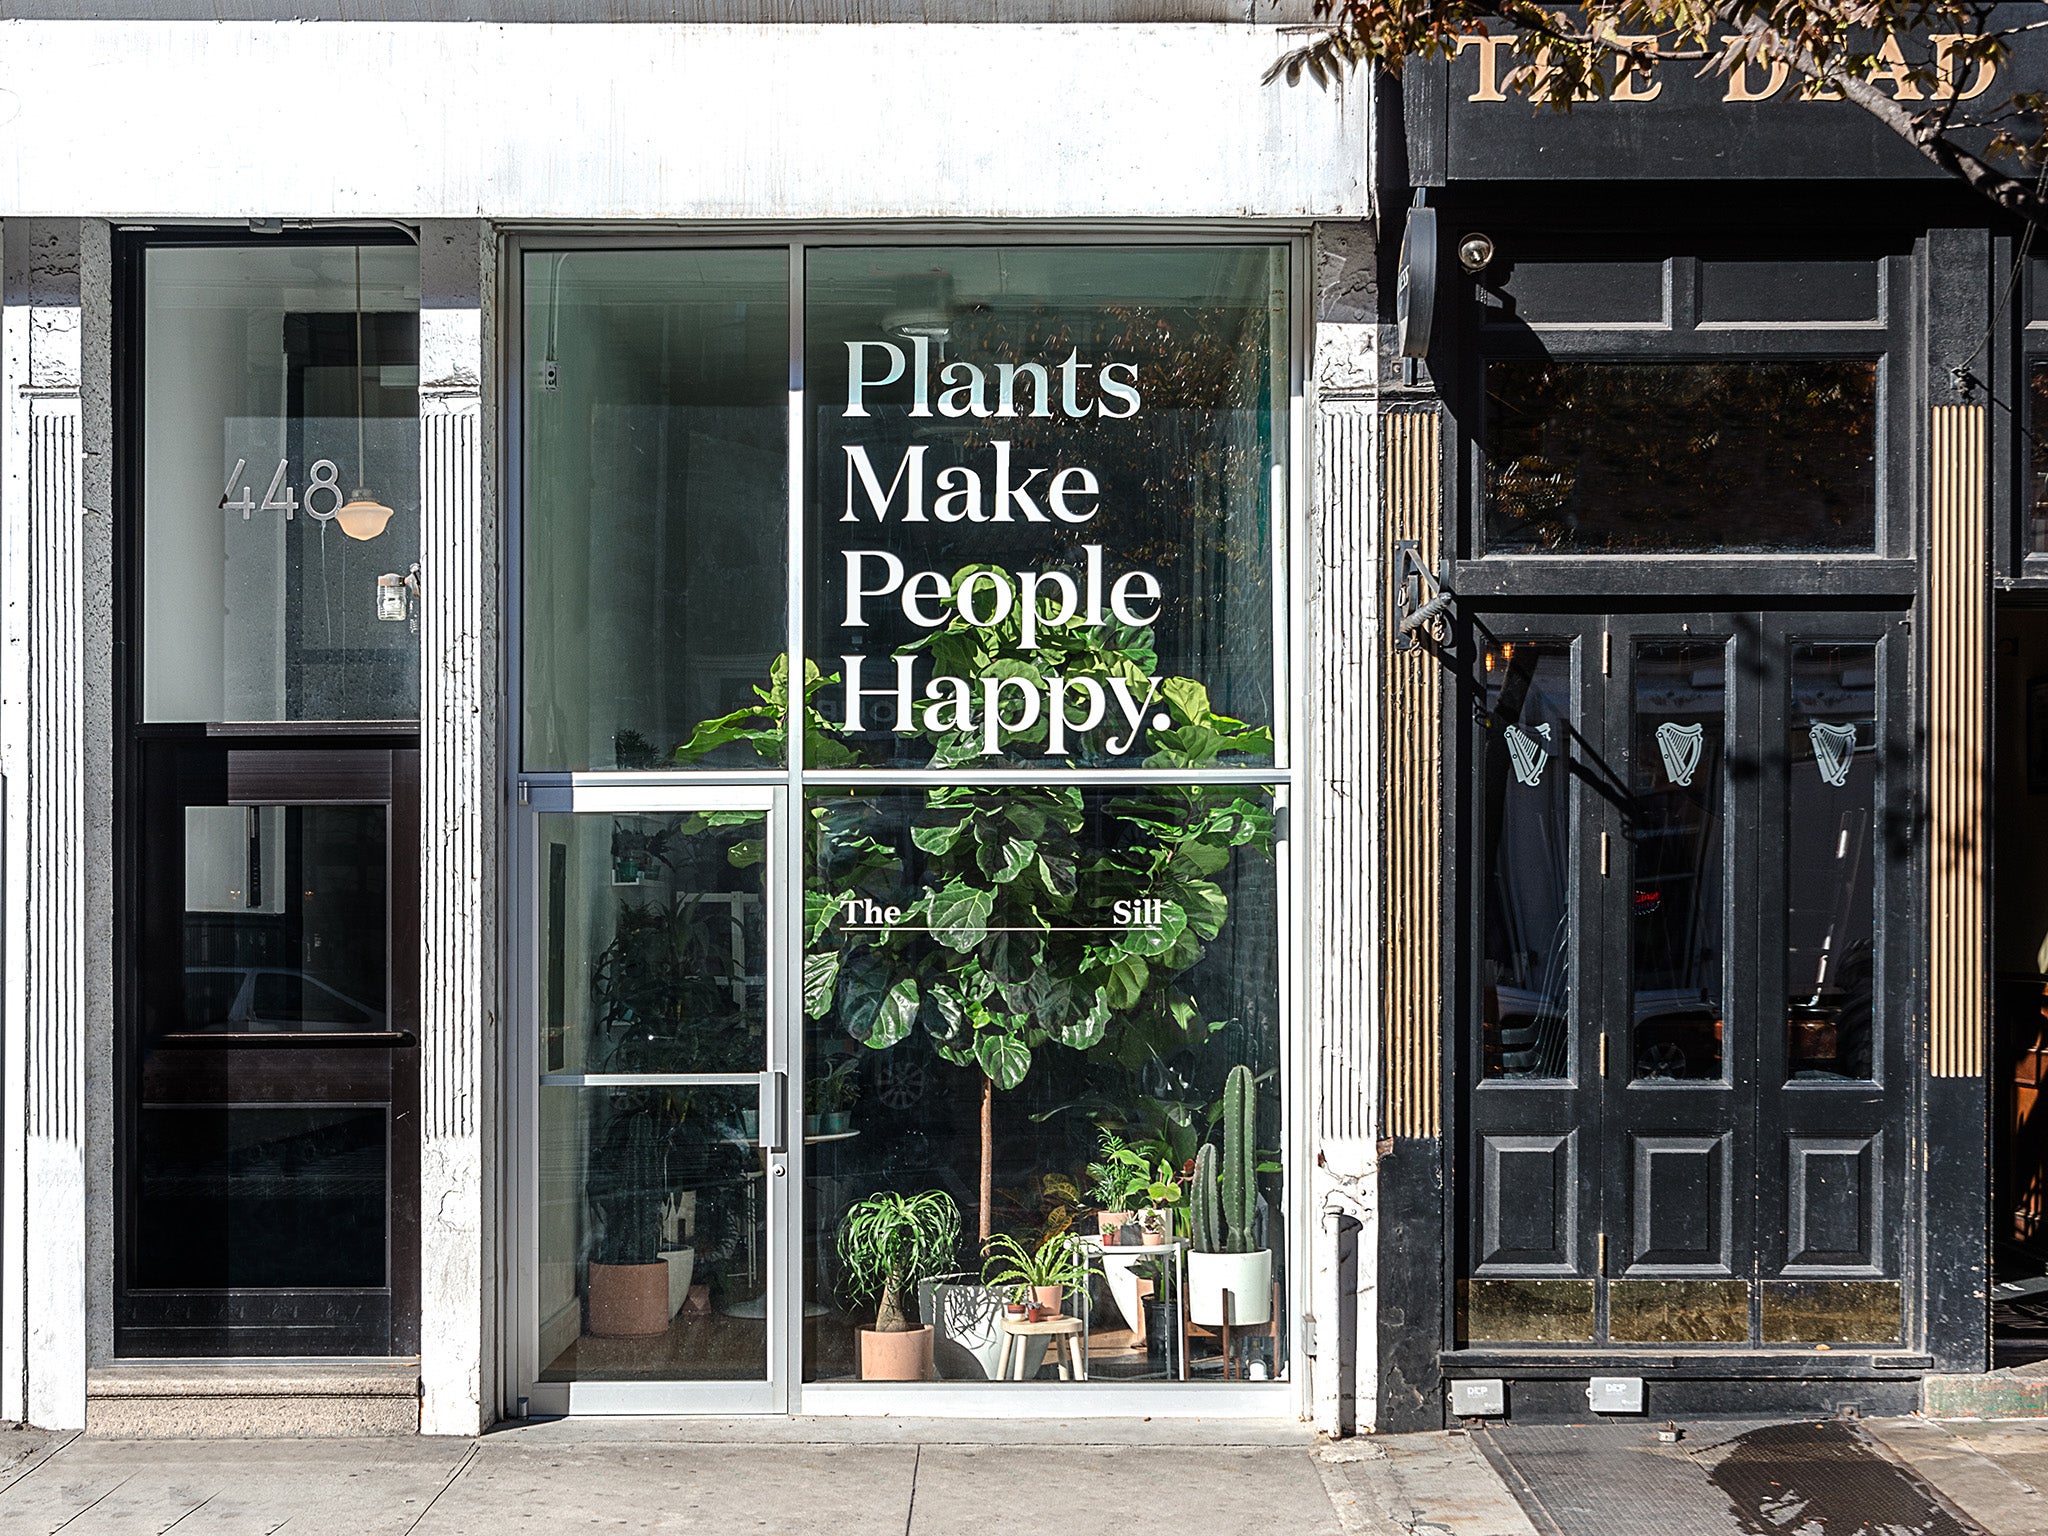 The Sill is not simply a cheeky, curated plant boutique...